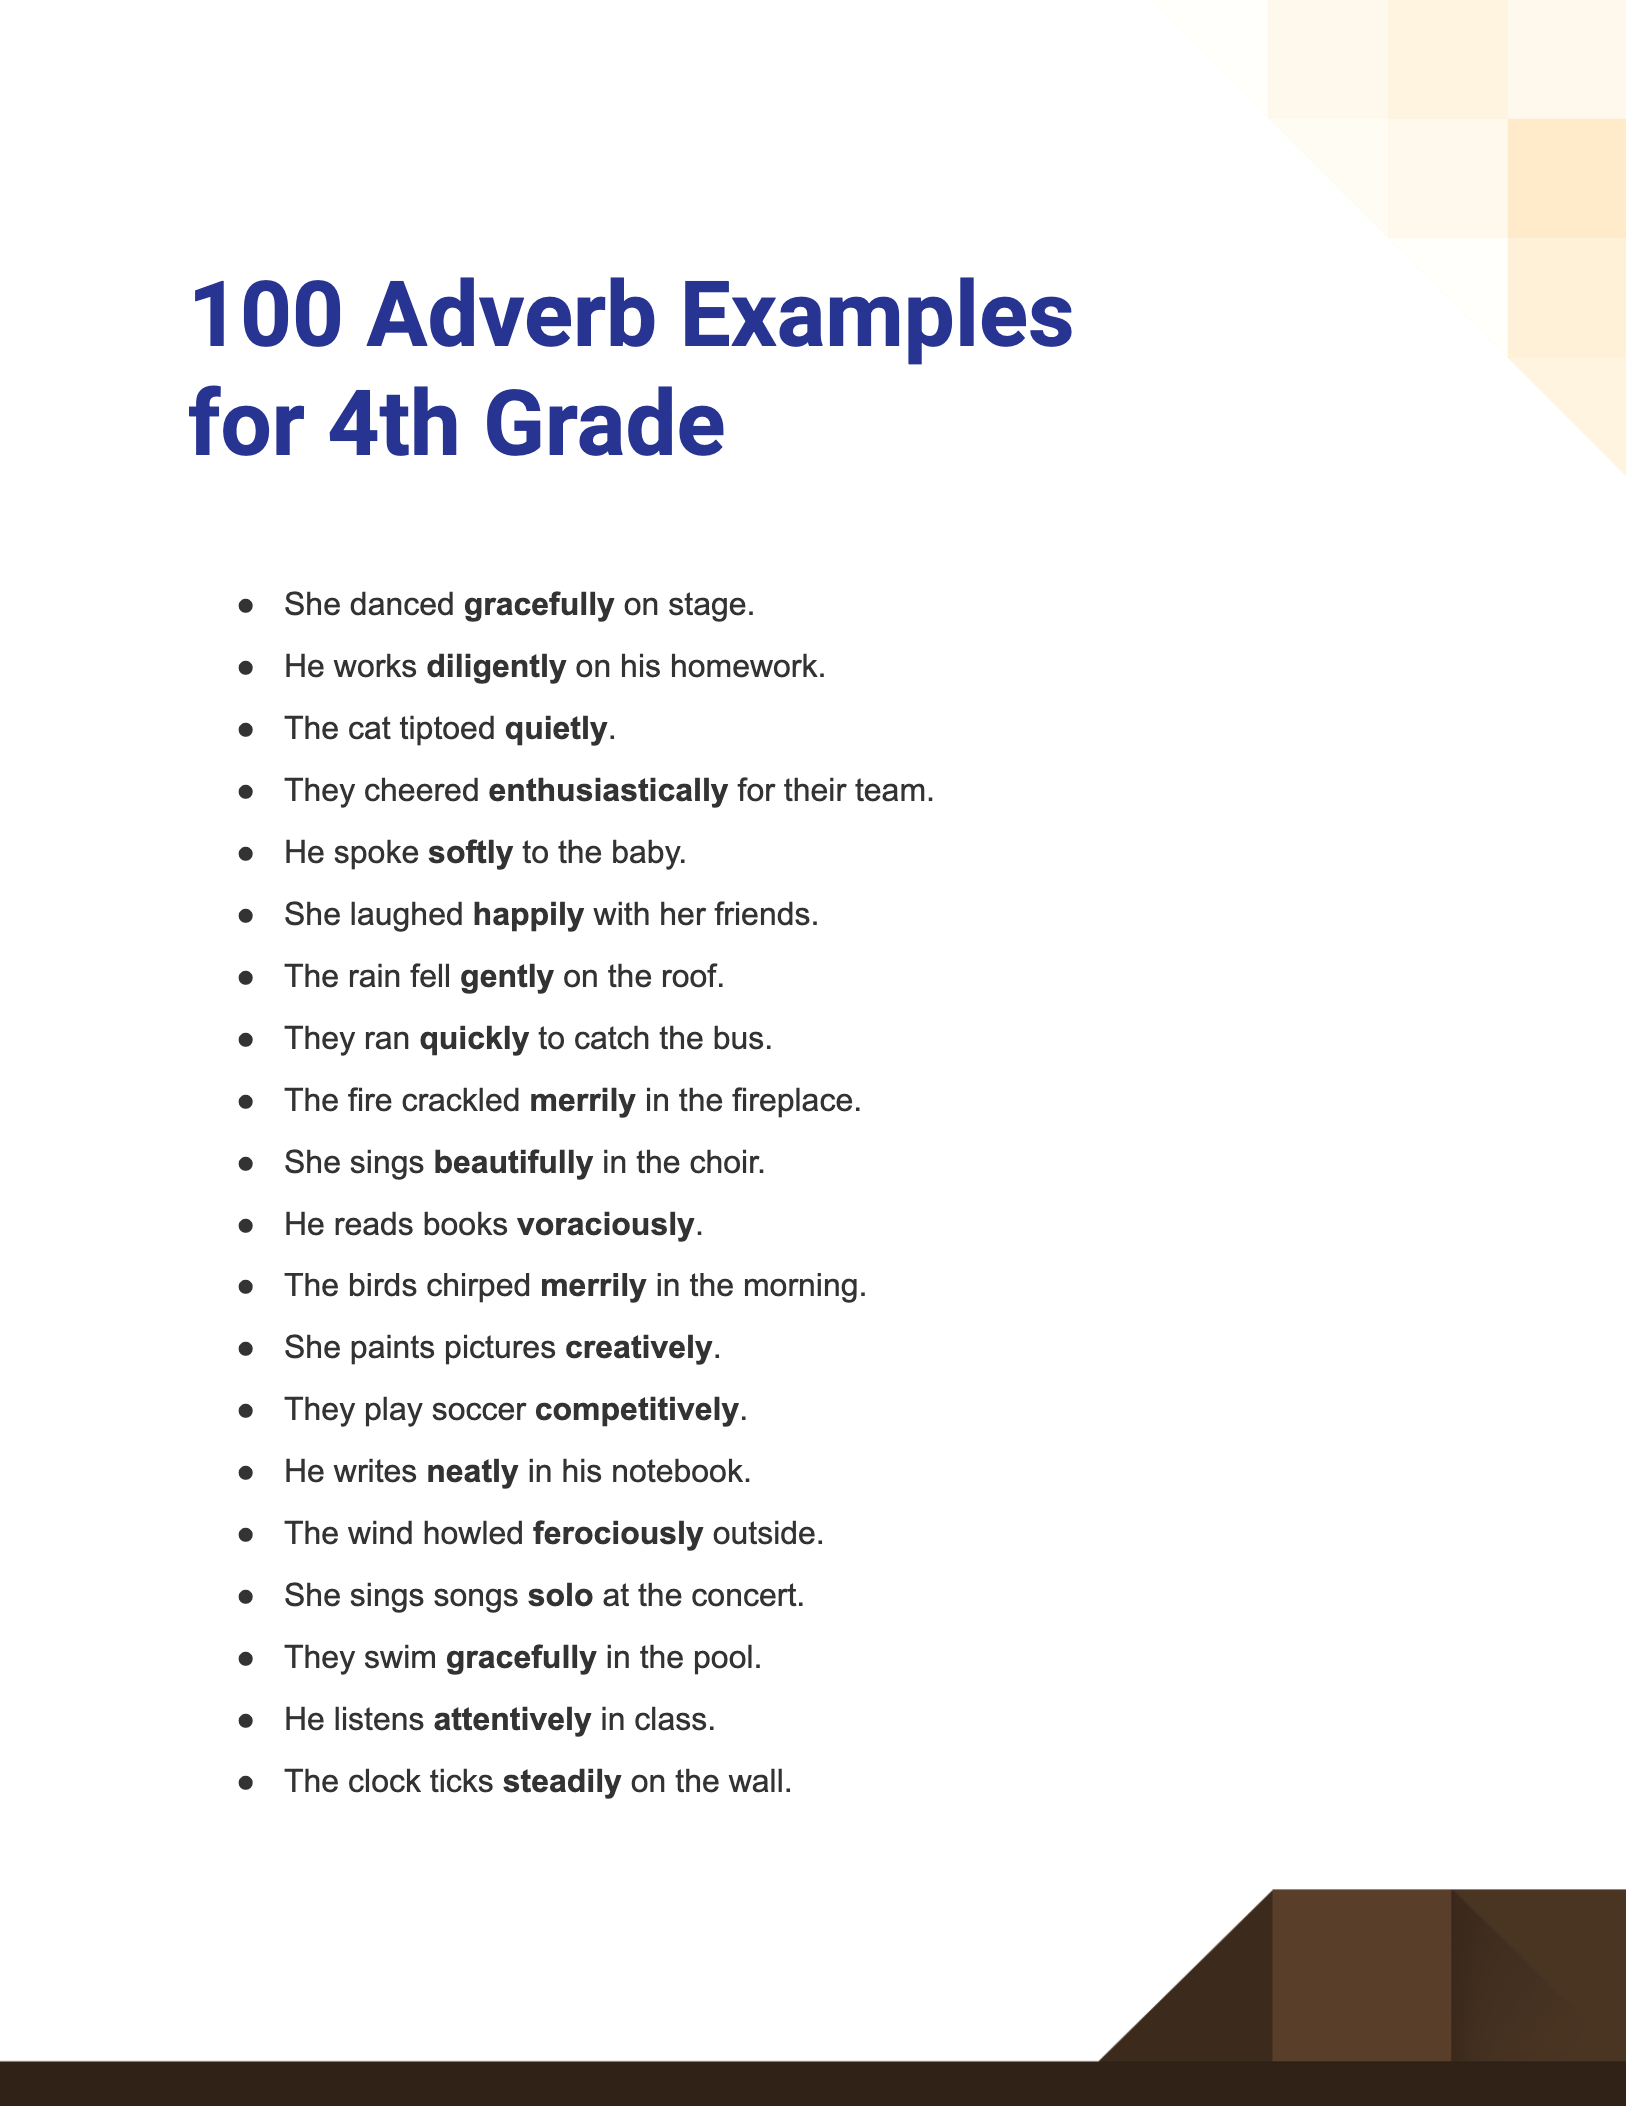 adverb examples for 4th grade1